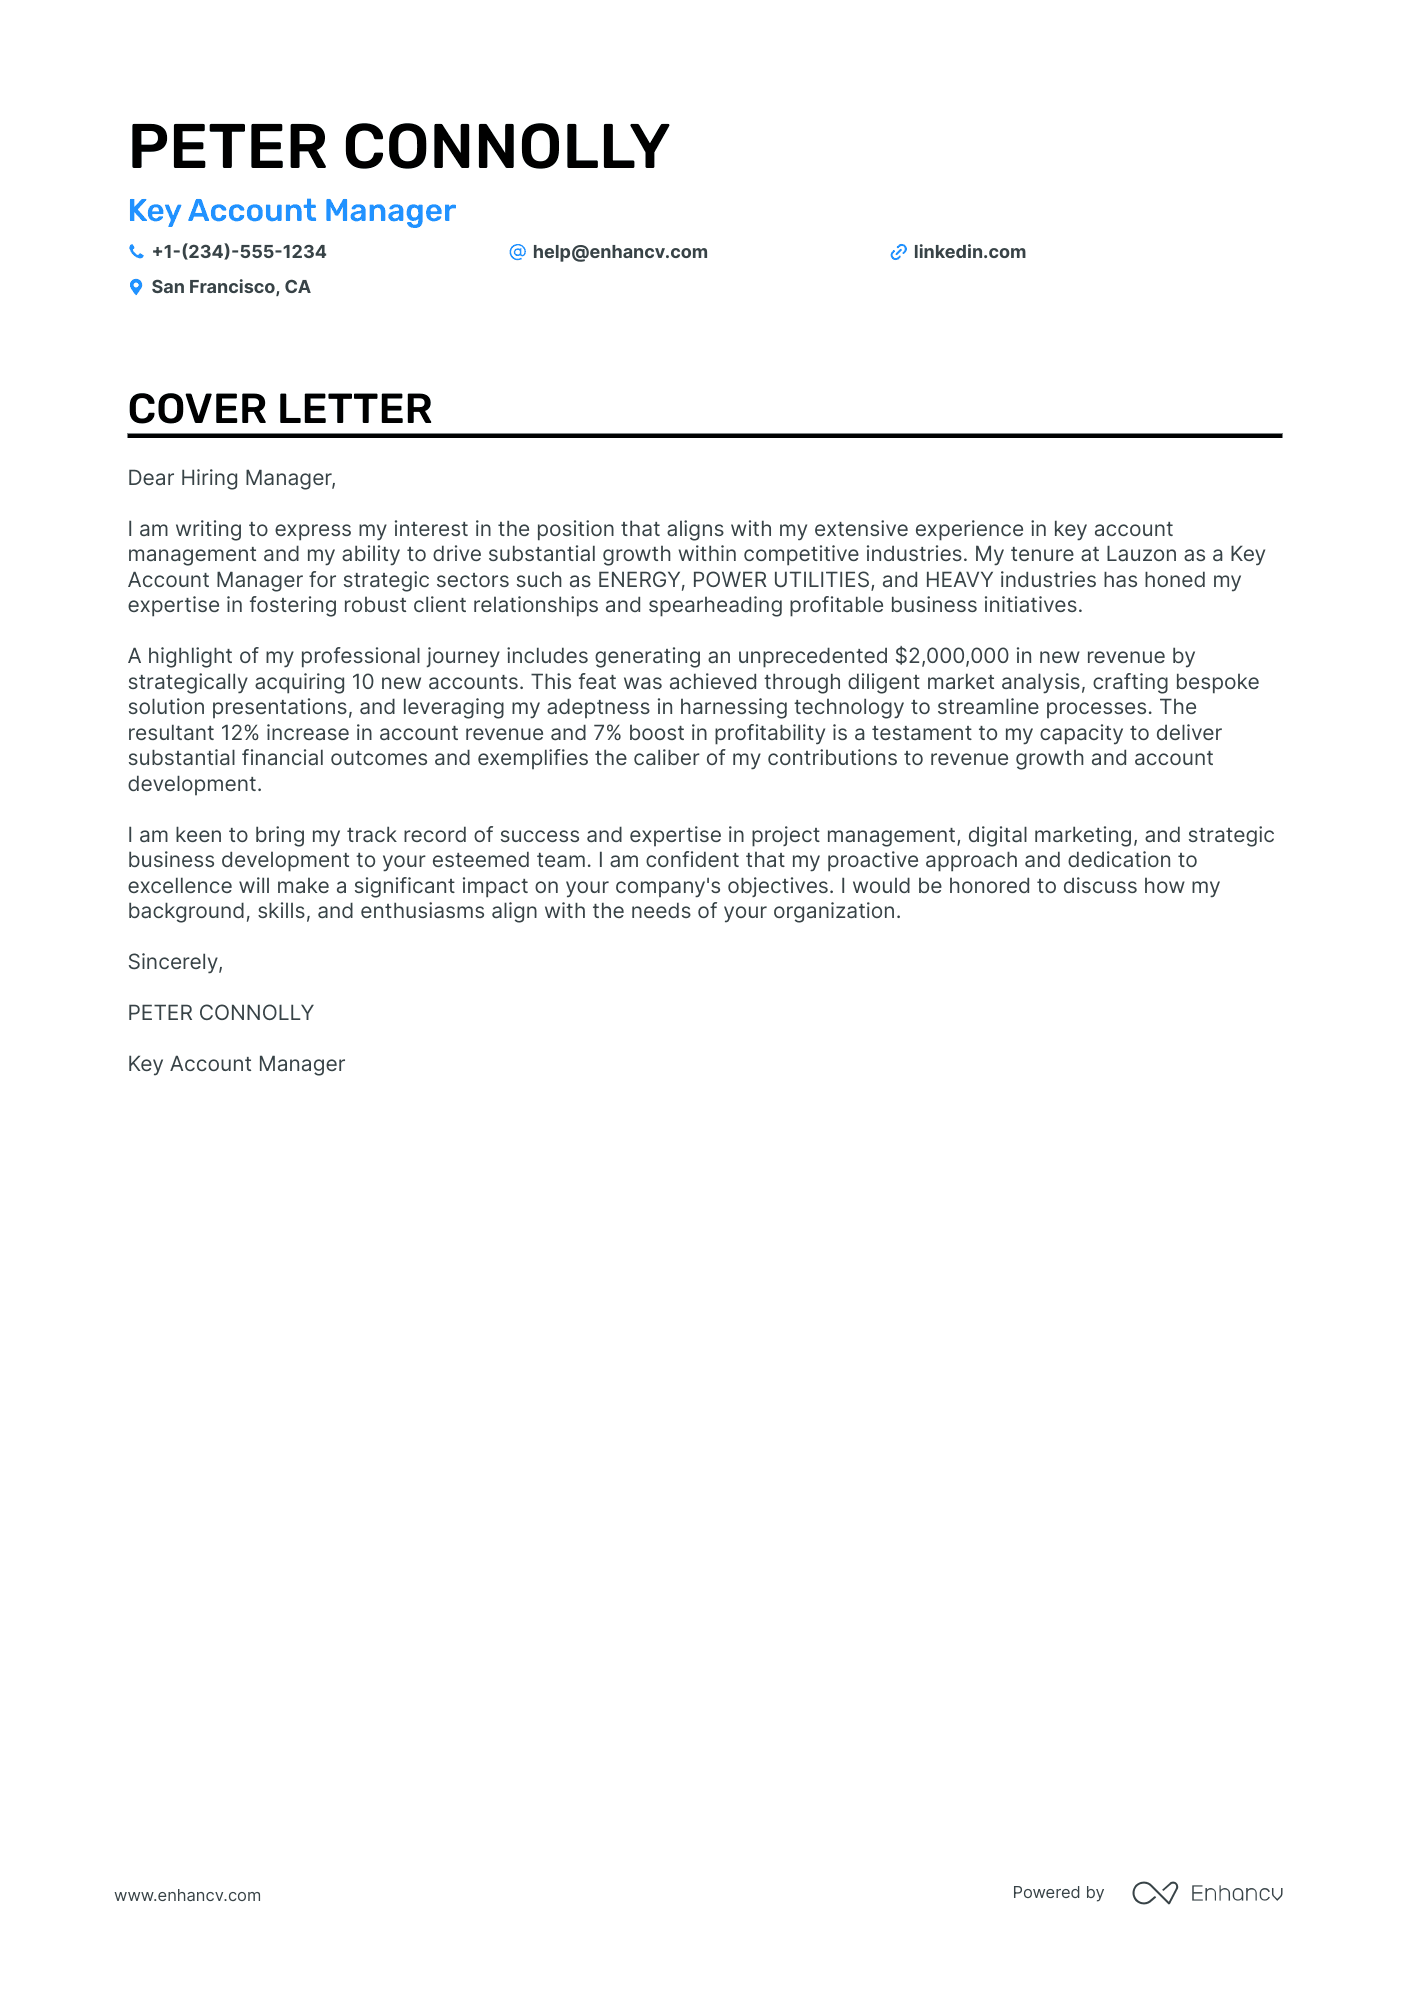 Account Manager cover letter